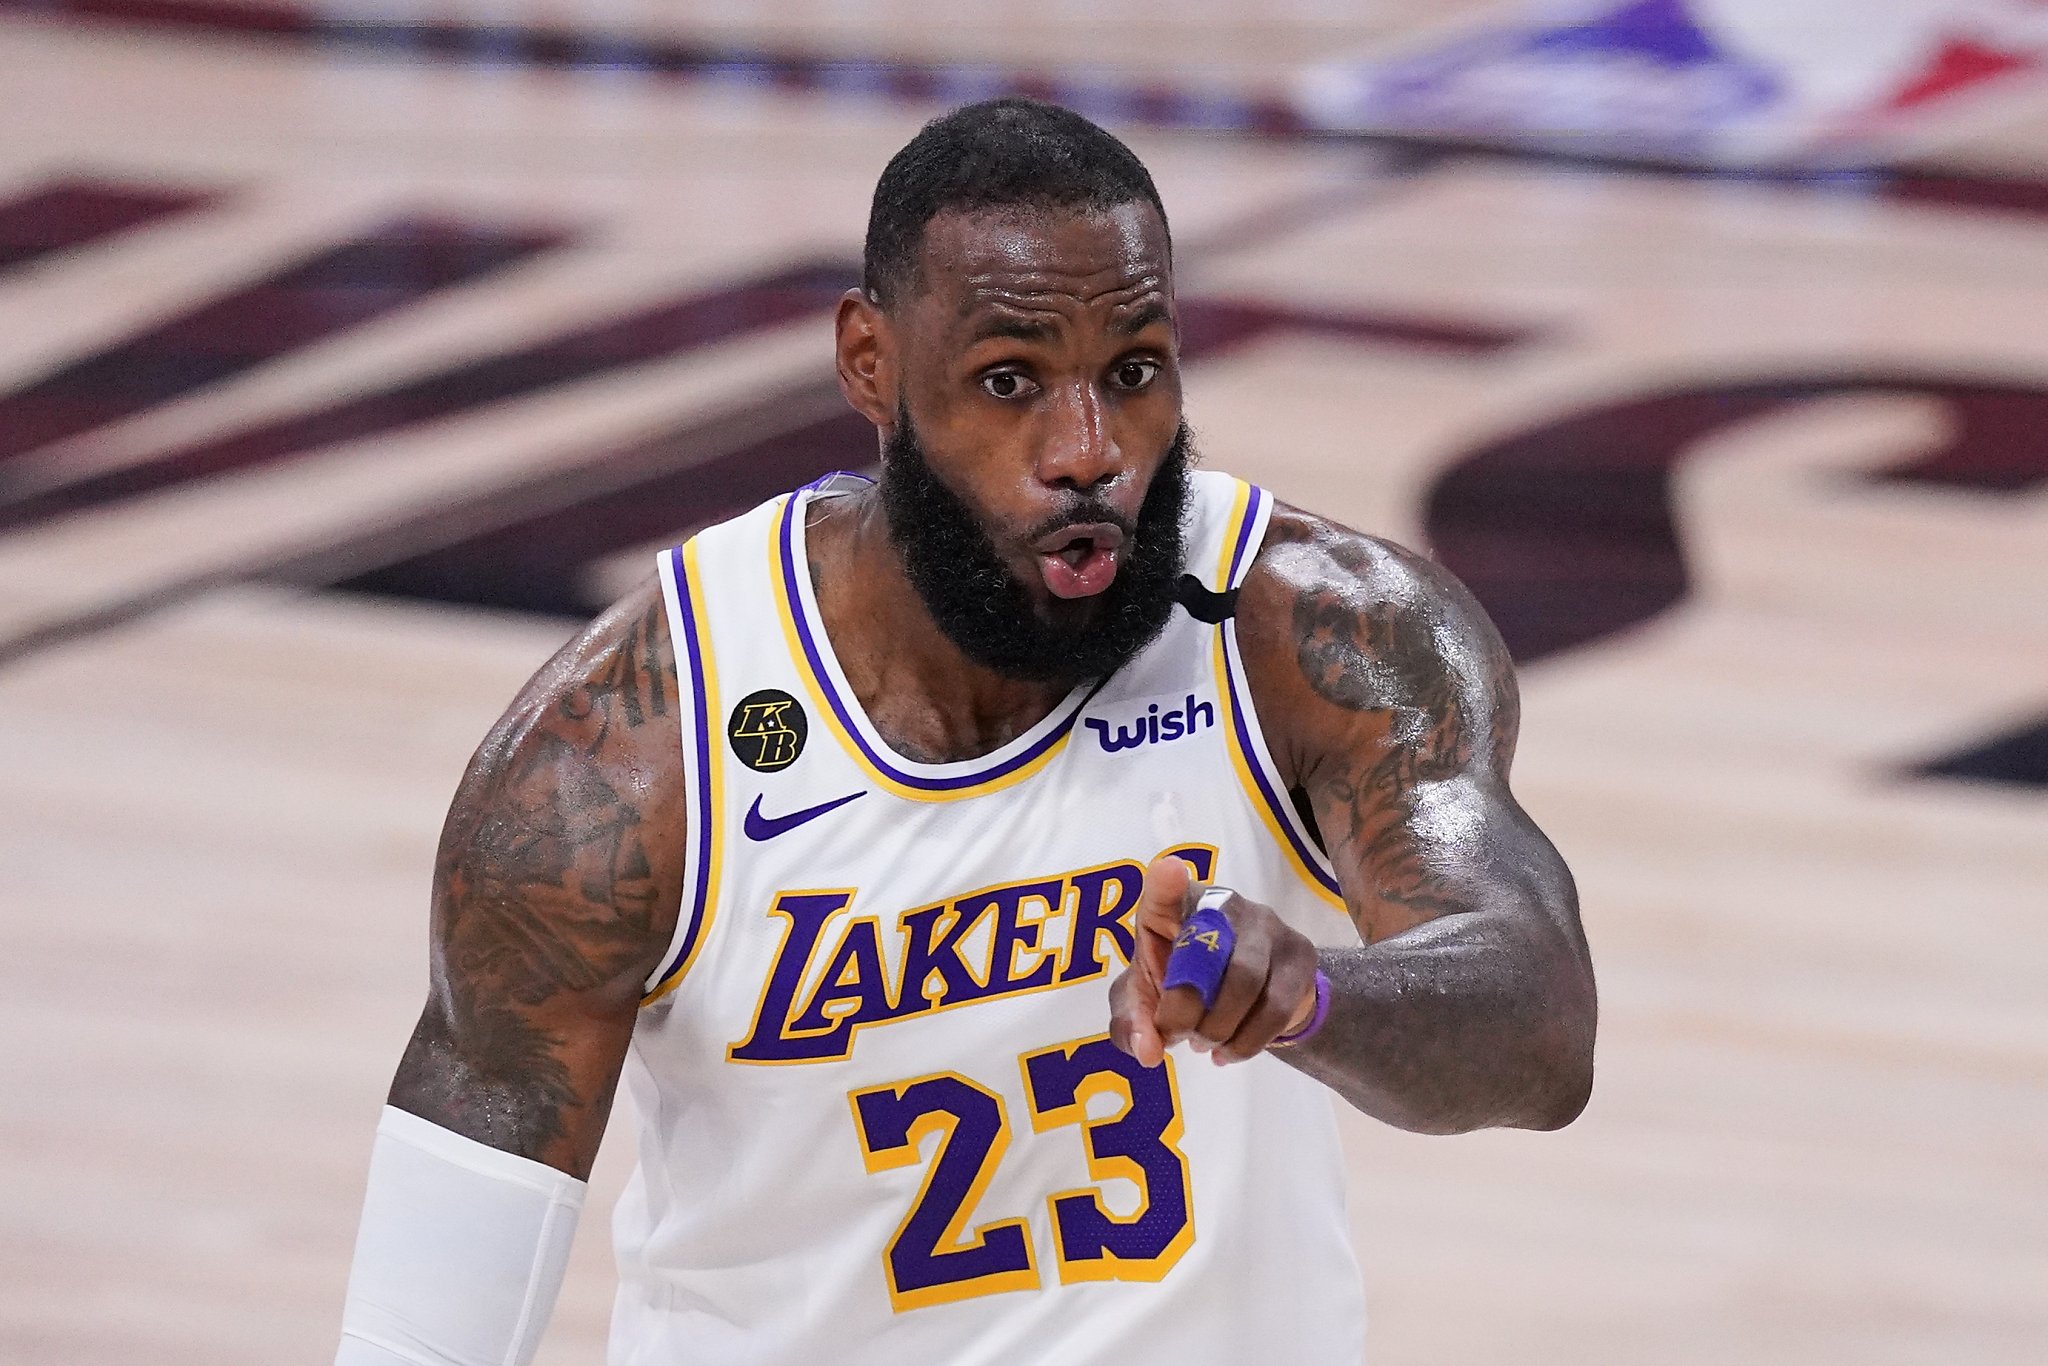 LeBron James makes All-NBA team for record 16th time